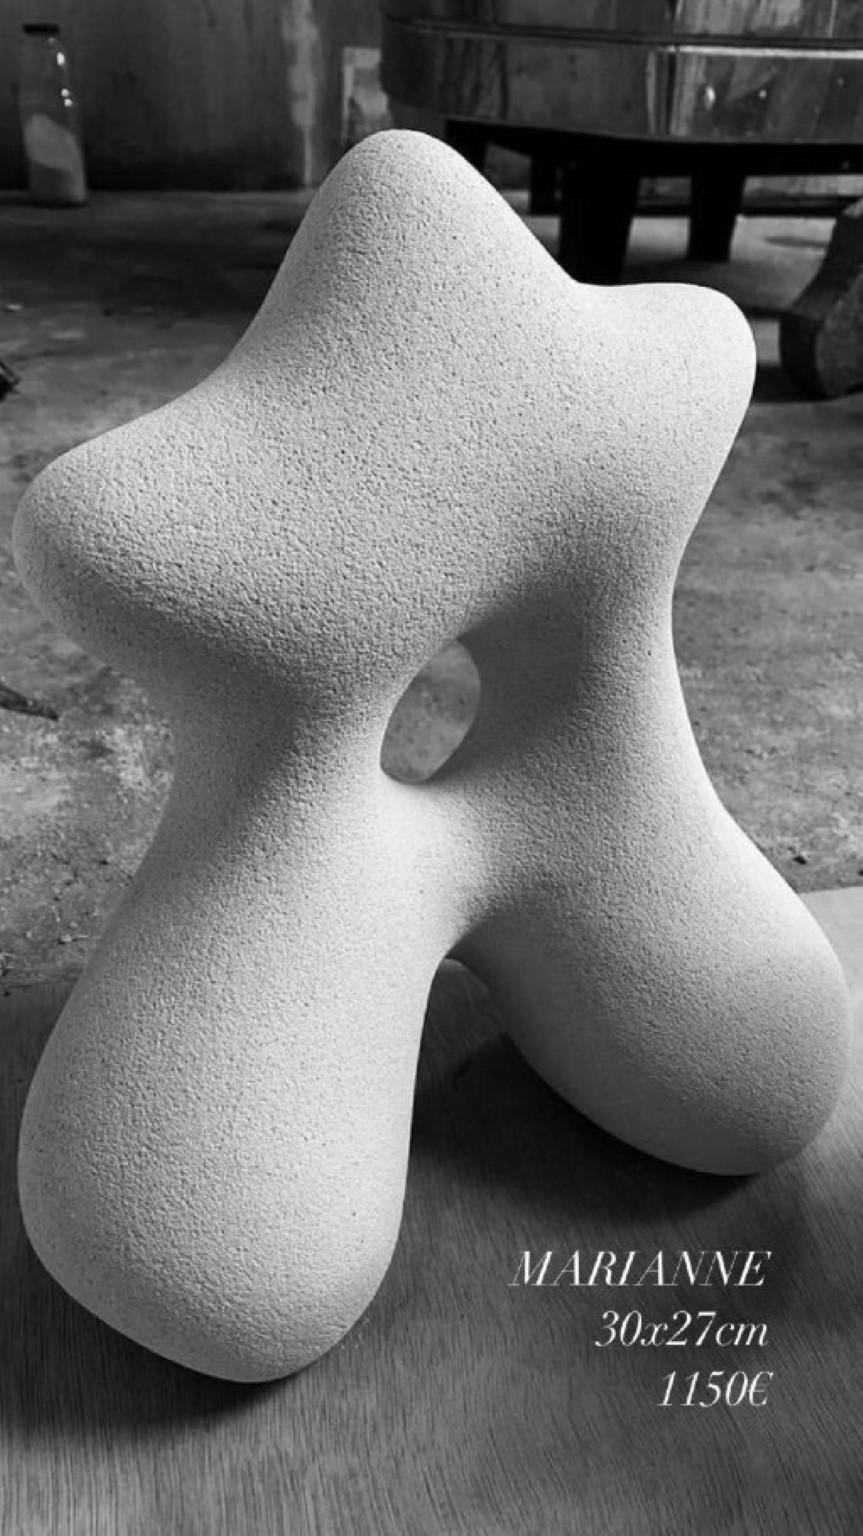 French Sandstone Marianne Hand Sculpted by Hermine Bourdin